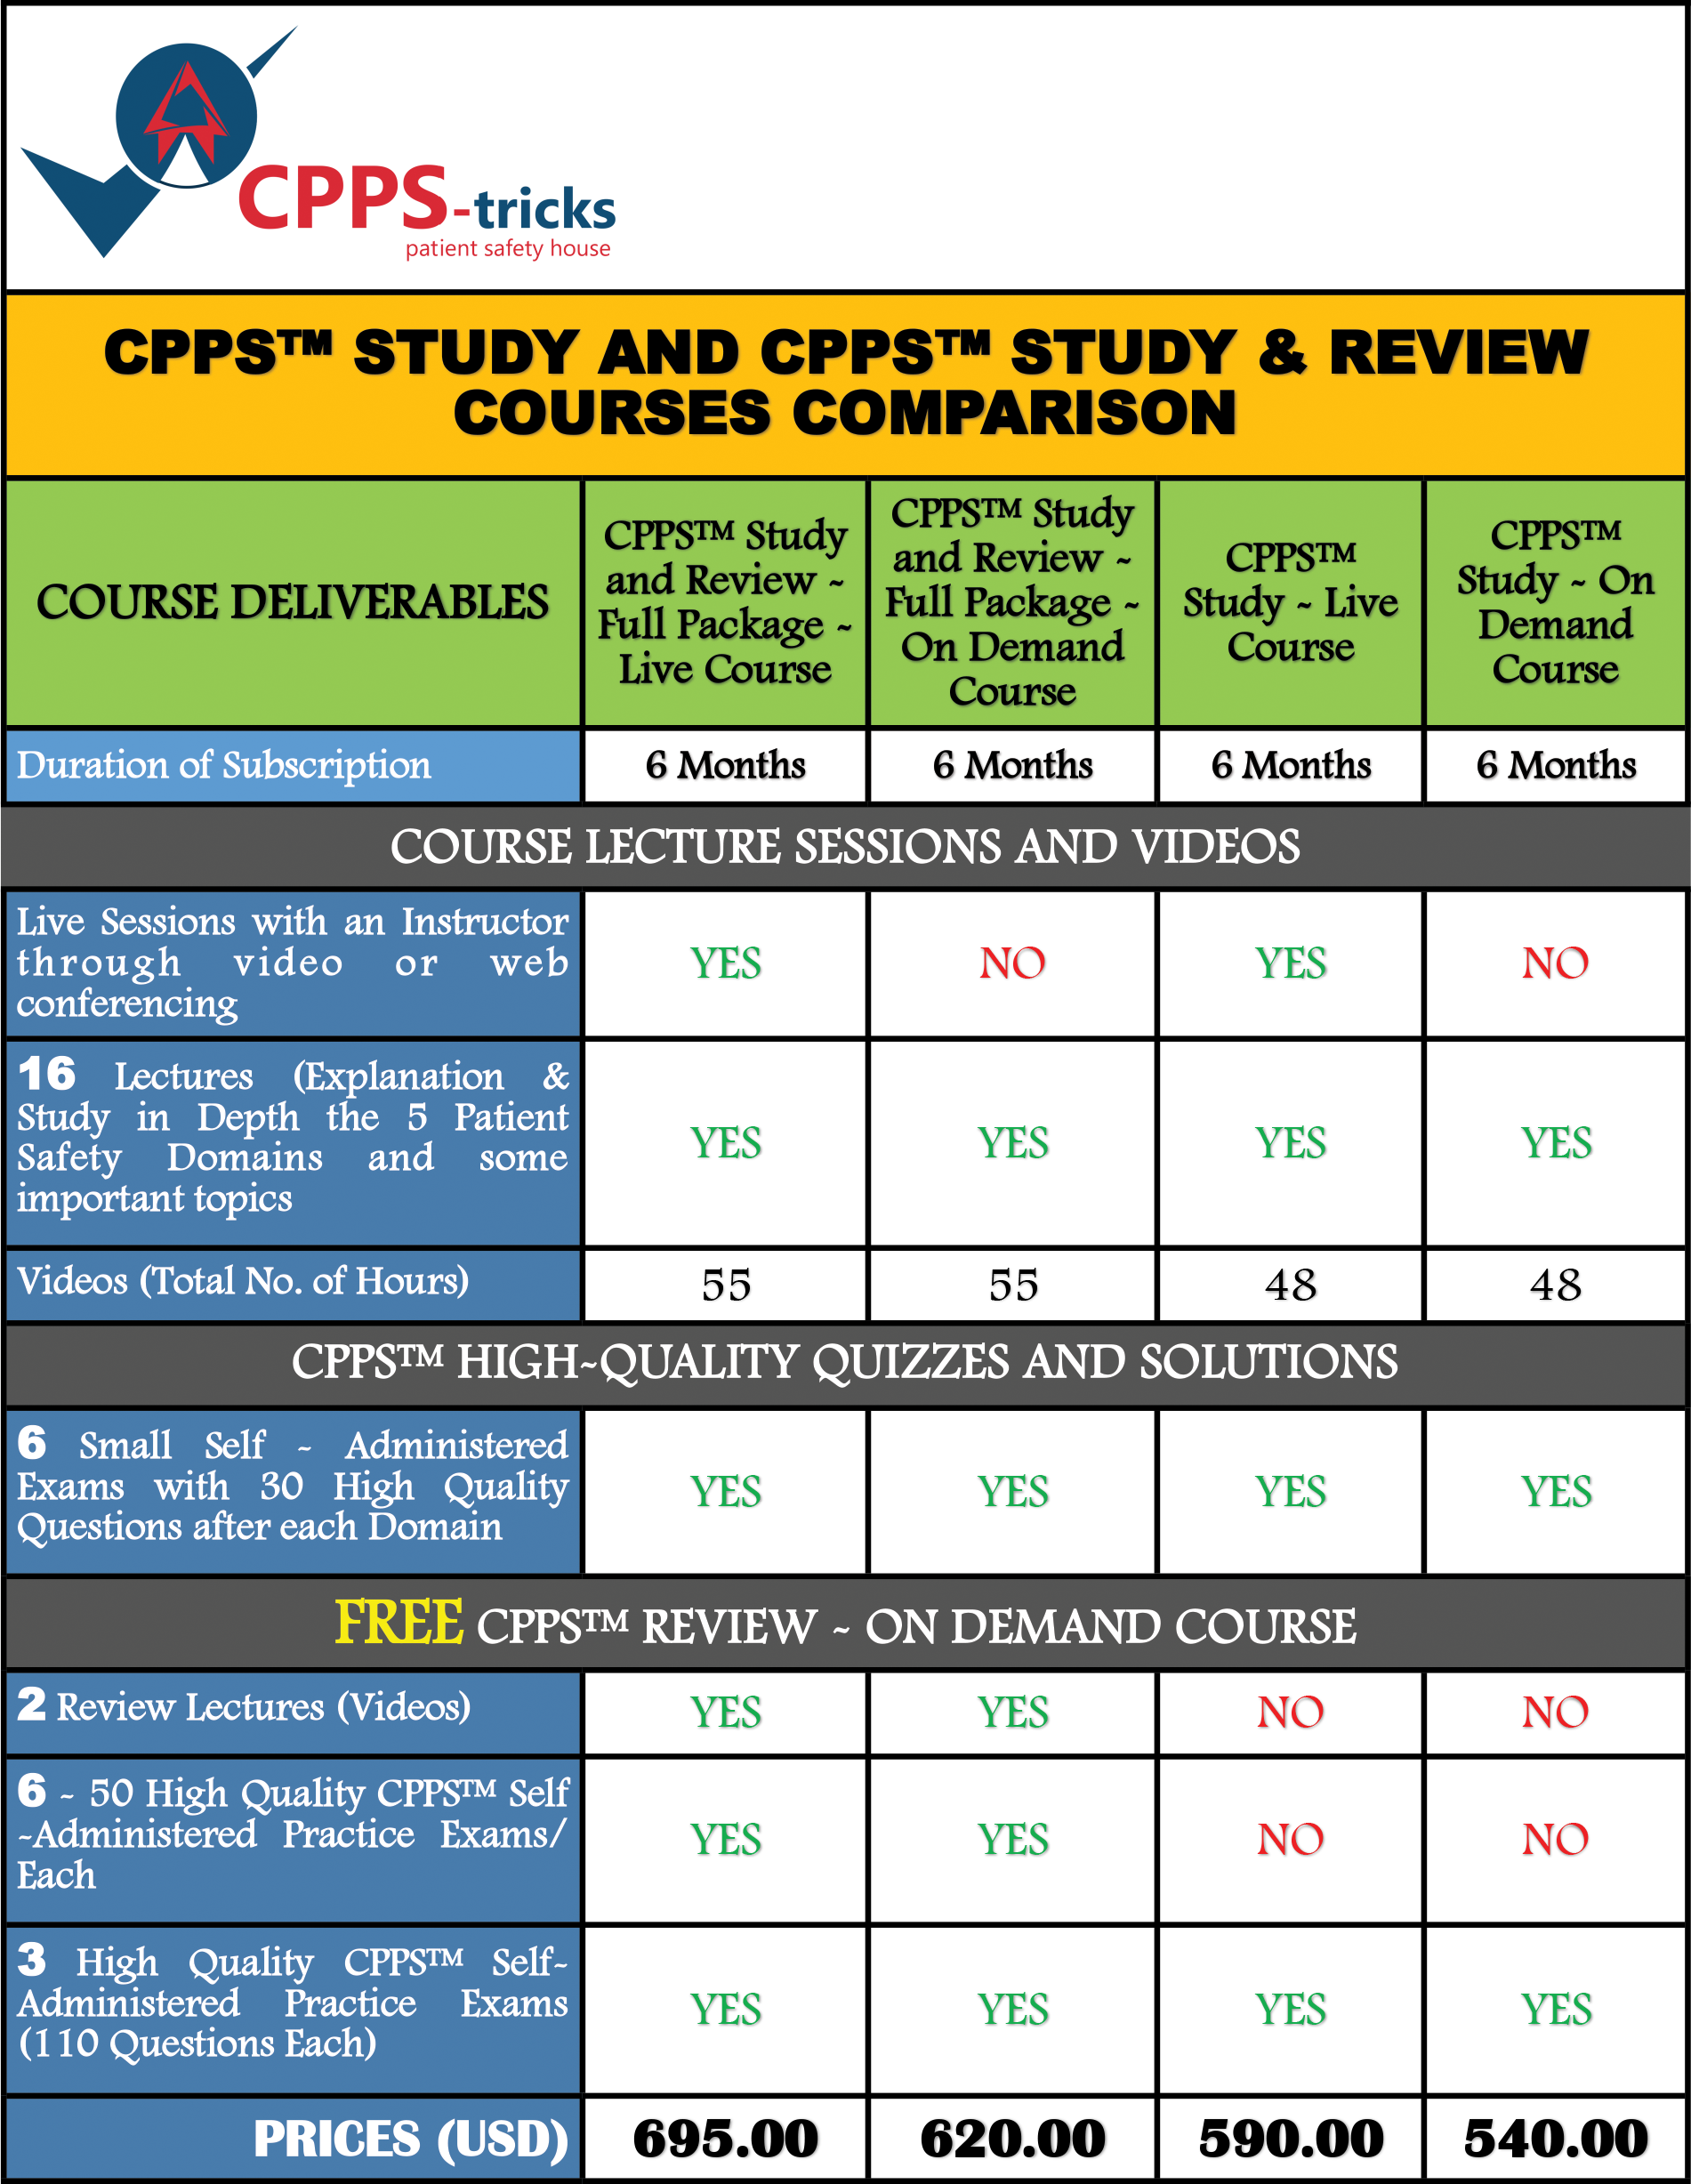 CPPS Study Course Comparisons